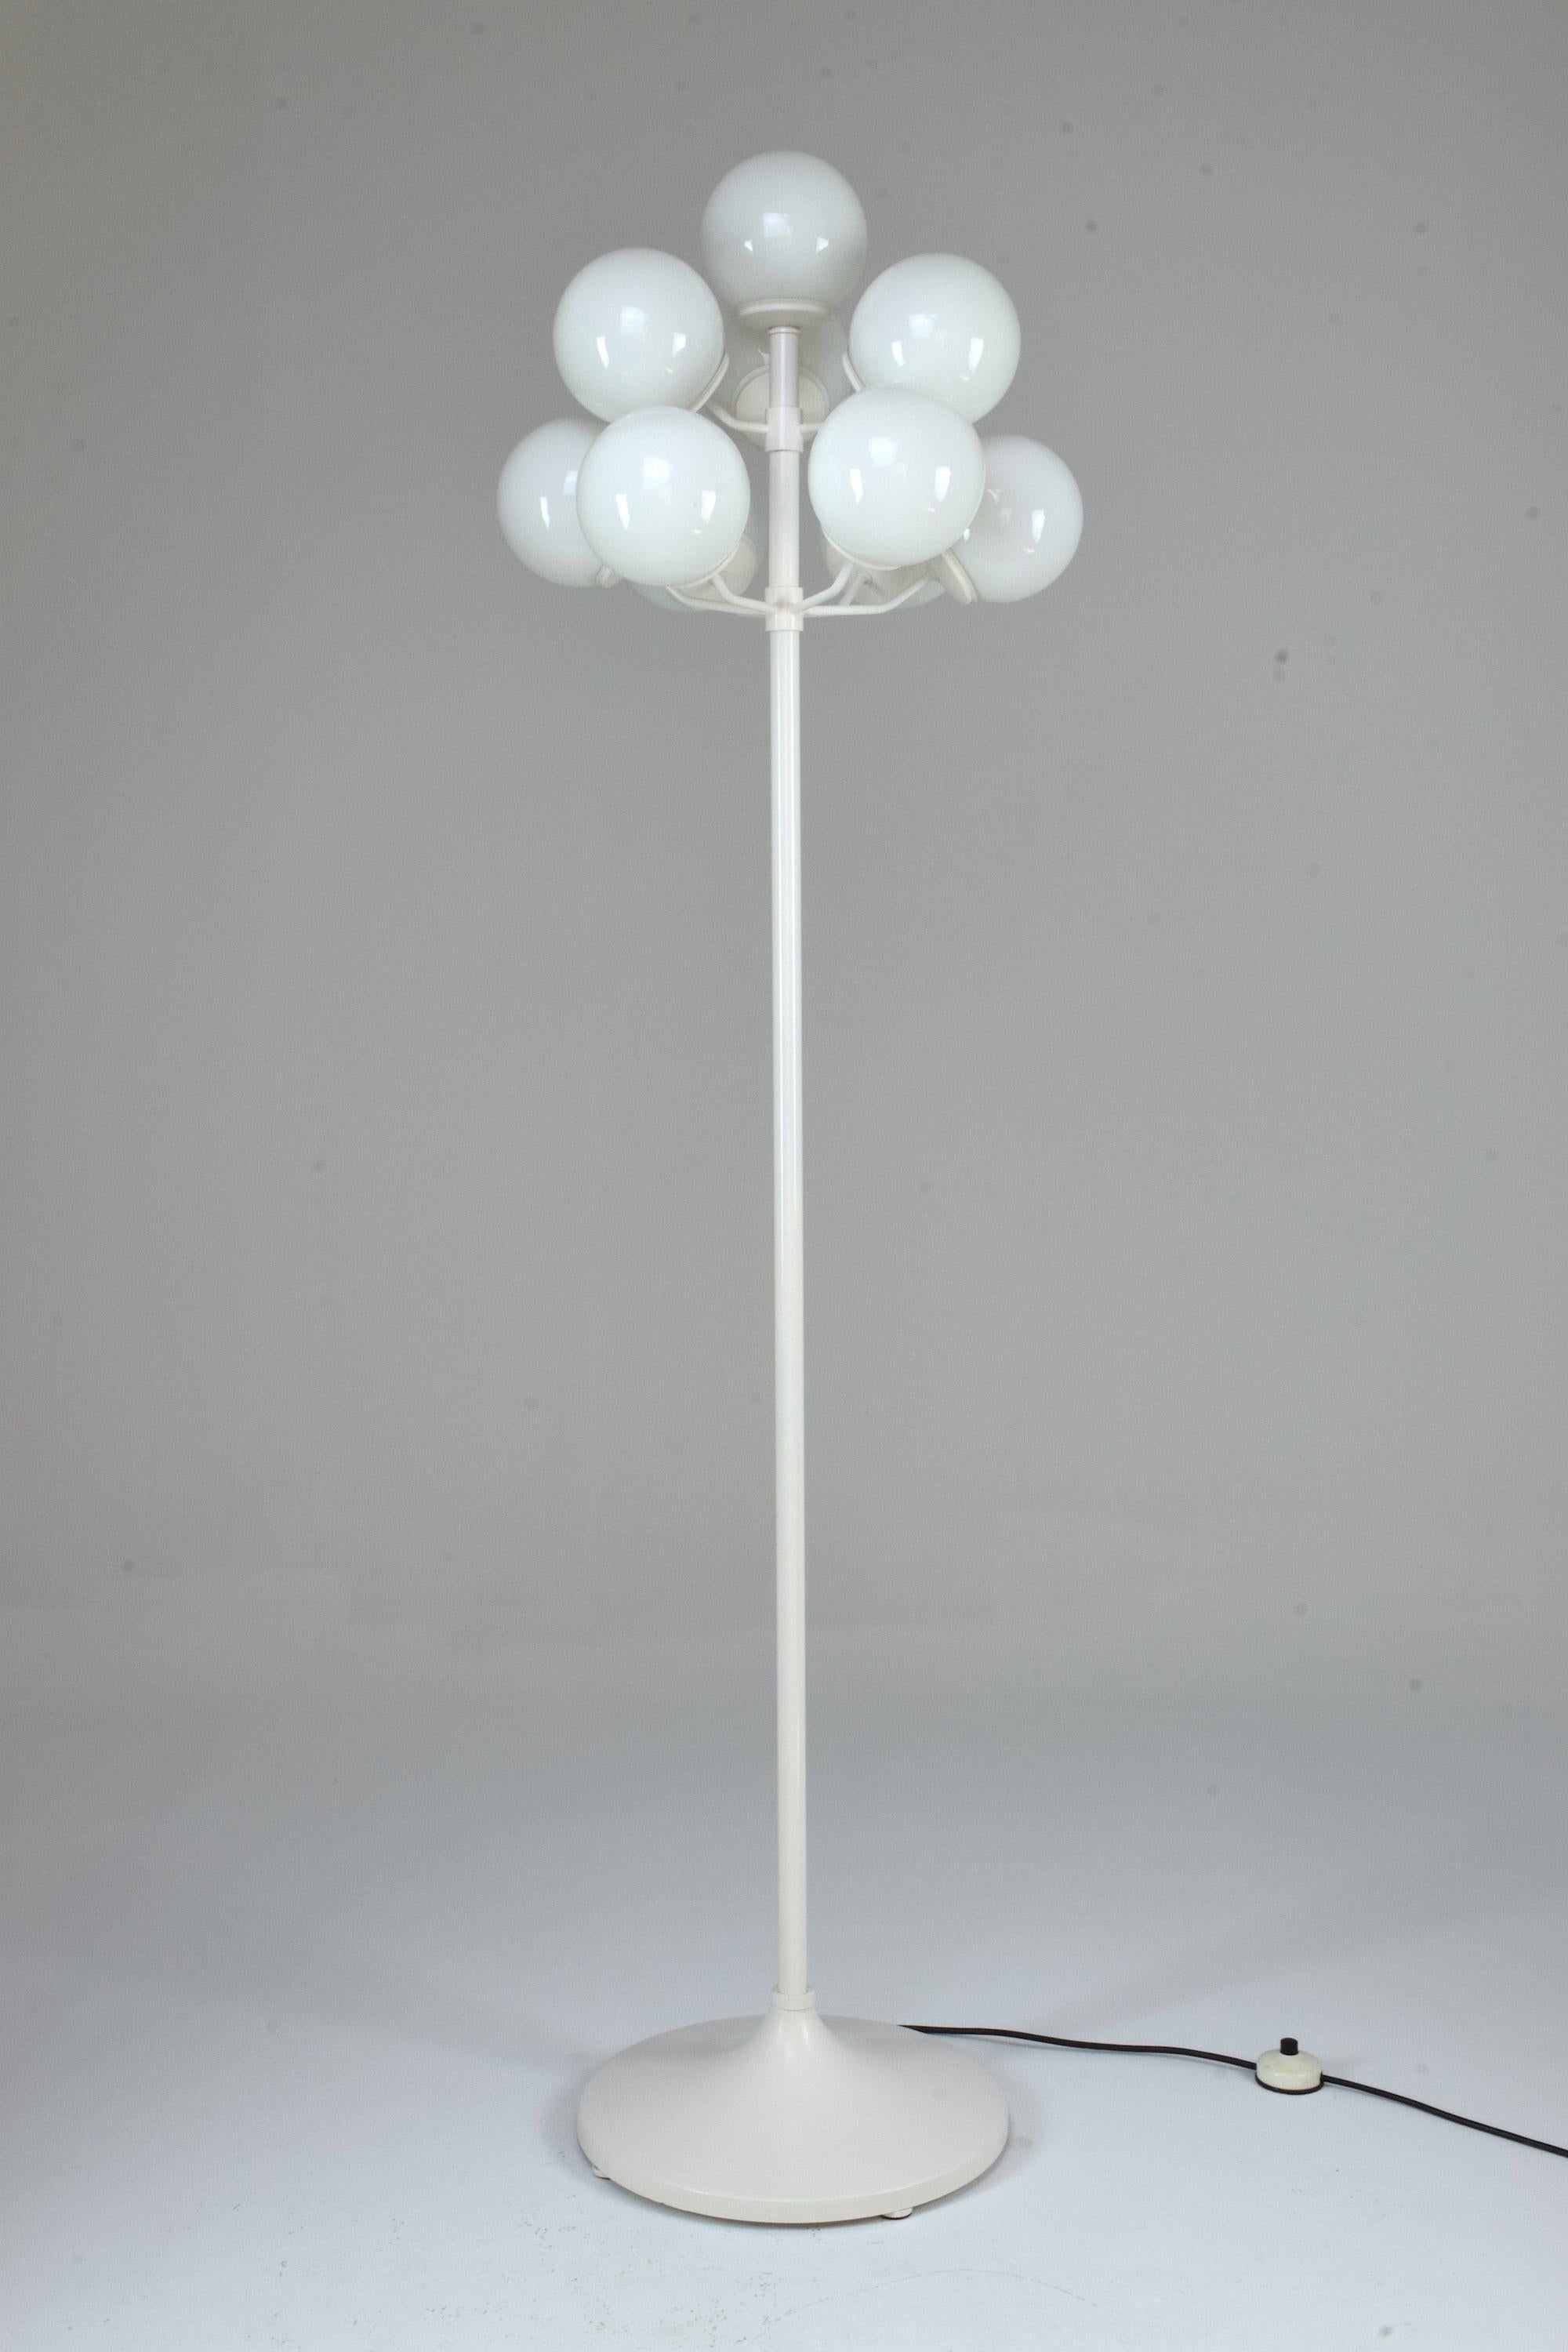 A 1960s vintage floor lamp in the style of Swedish designer Max Bill's iconic design. This piece is built with 10 atomic style boule opal glass shades standing on a white re-lacquered metallic structure. 


We are an exhibition space and an